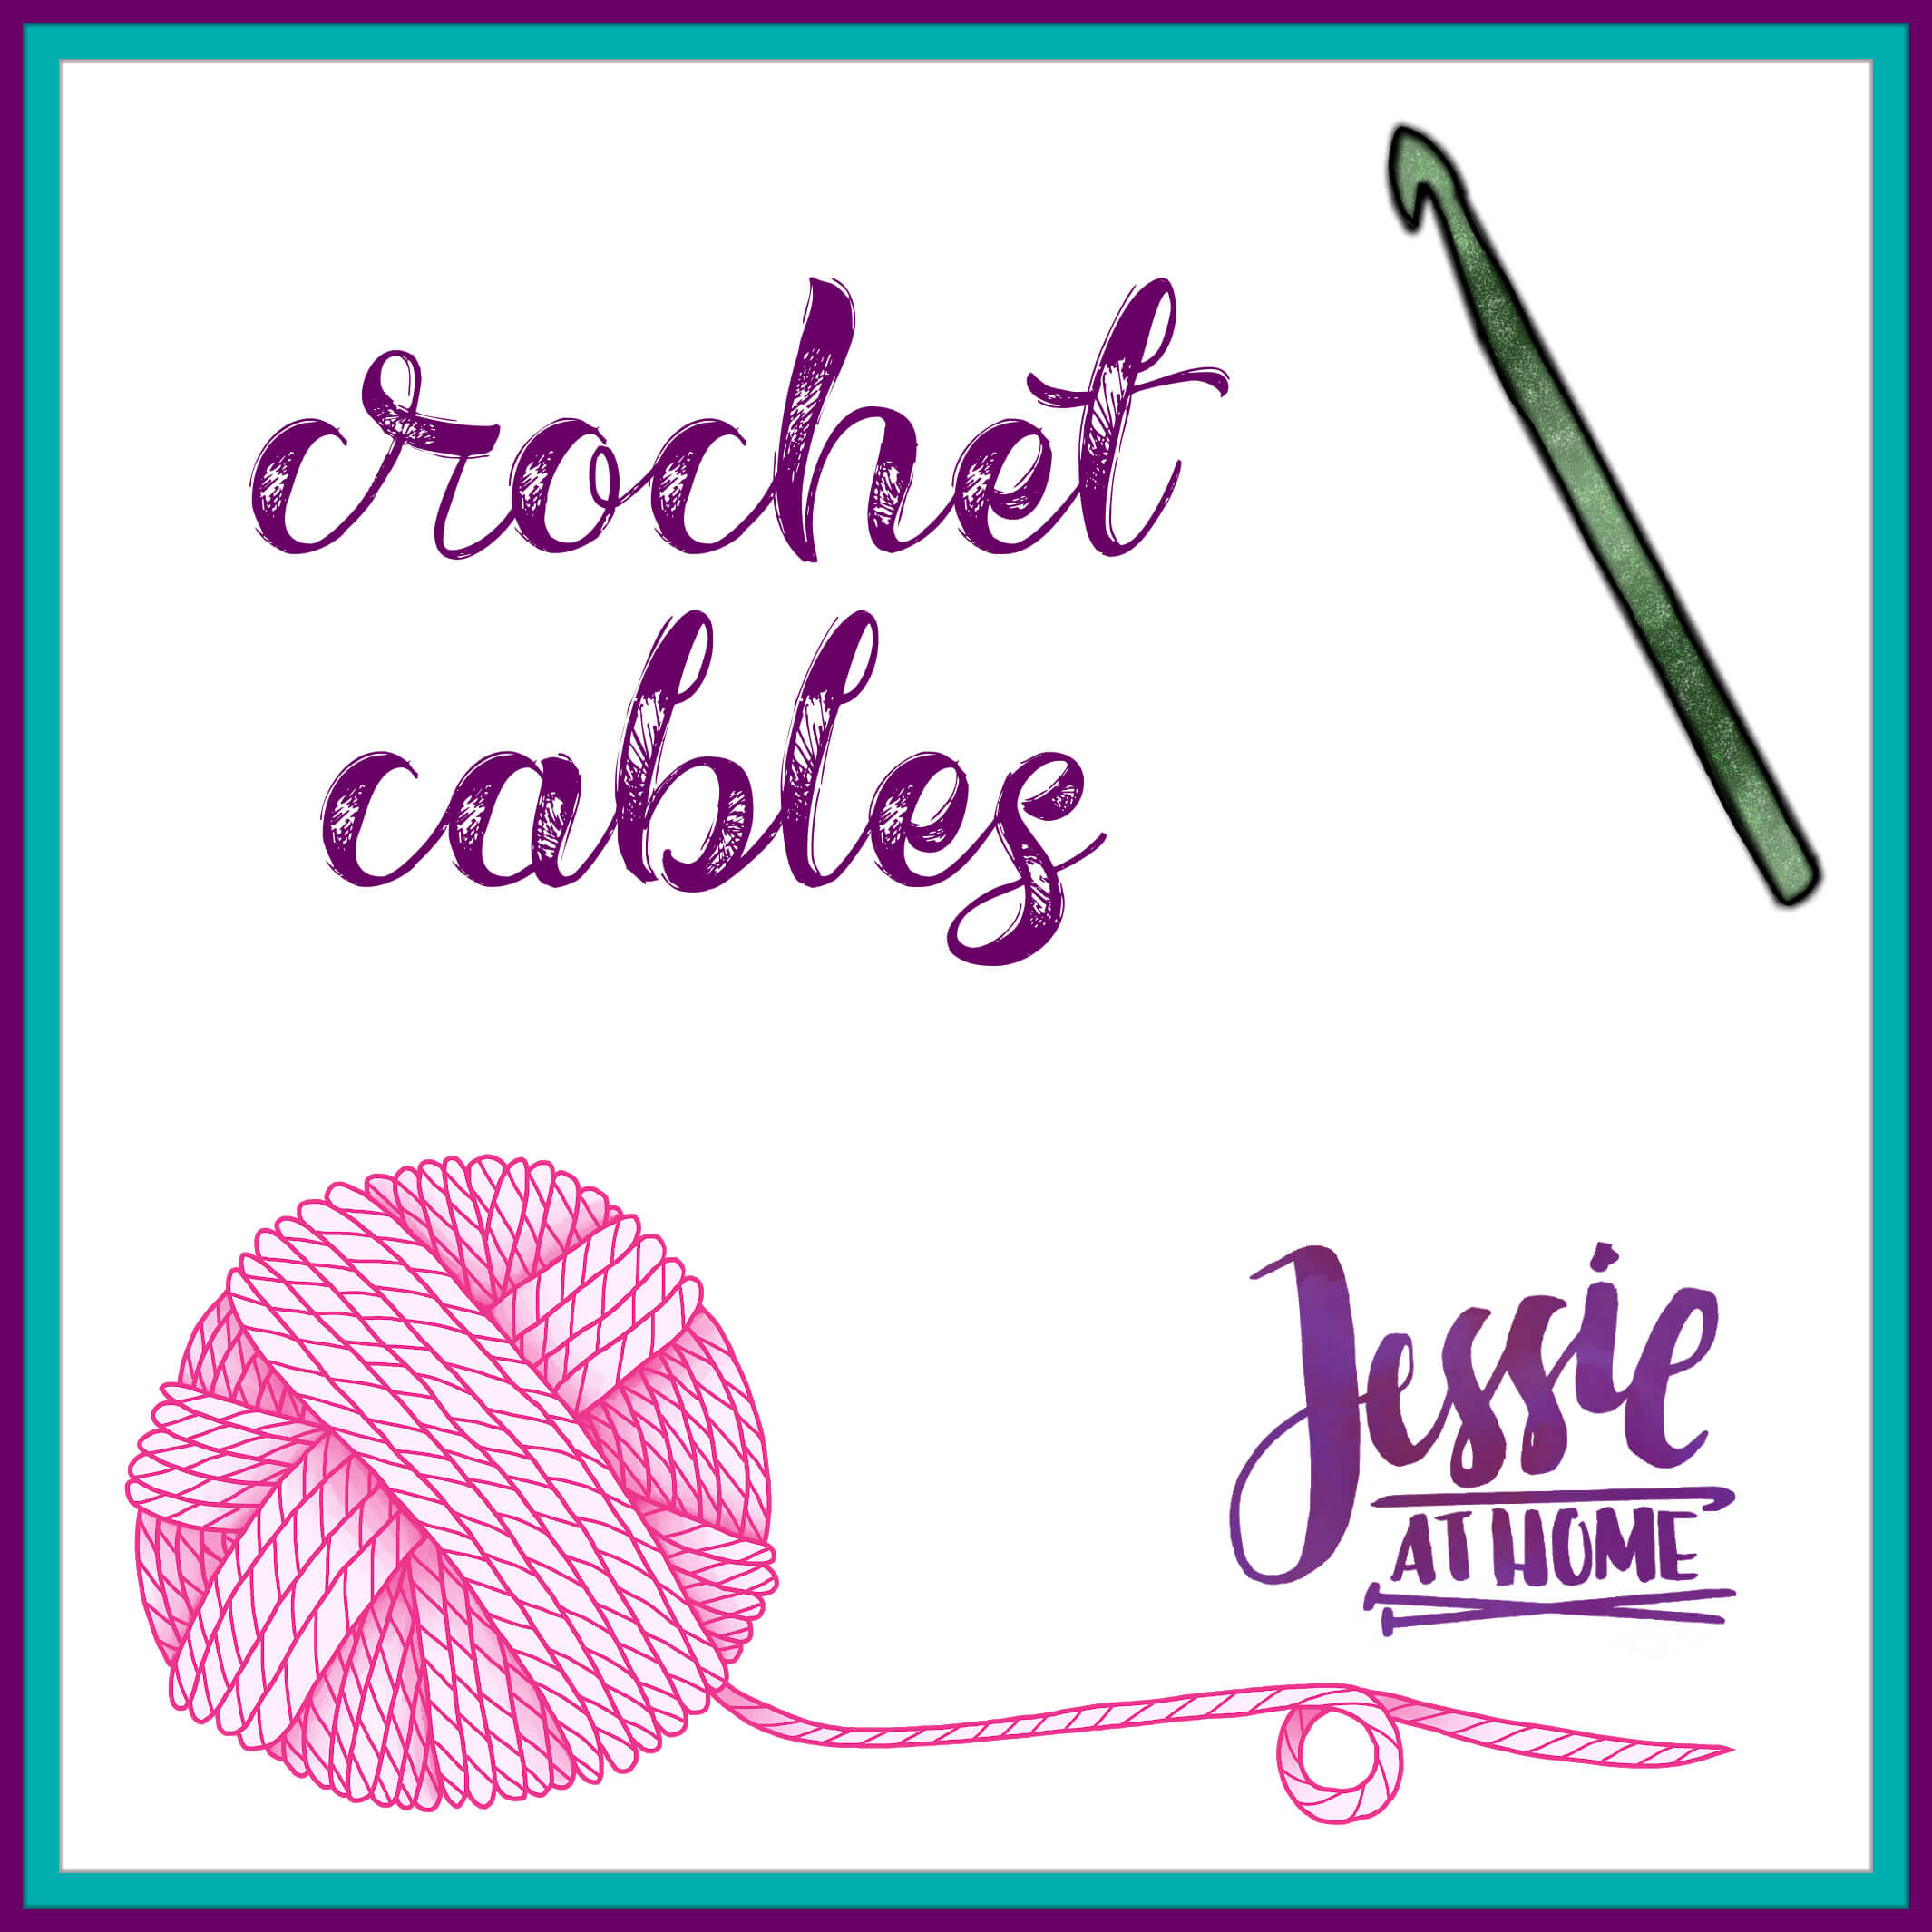 Crochet Cables Menu on Jessie At Home